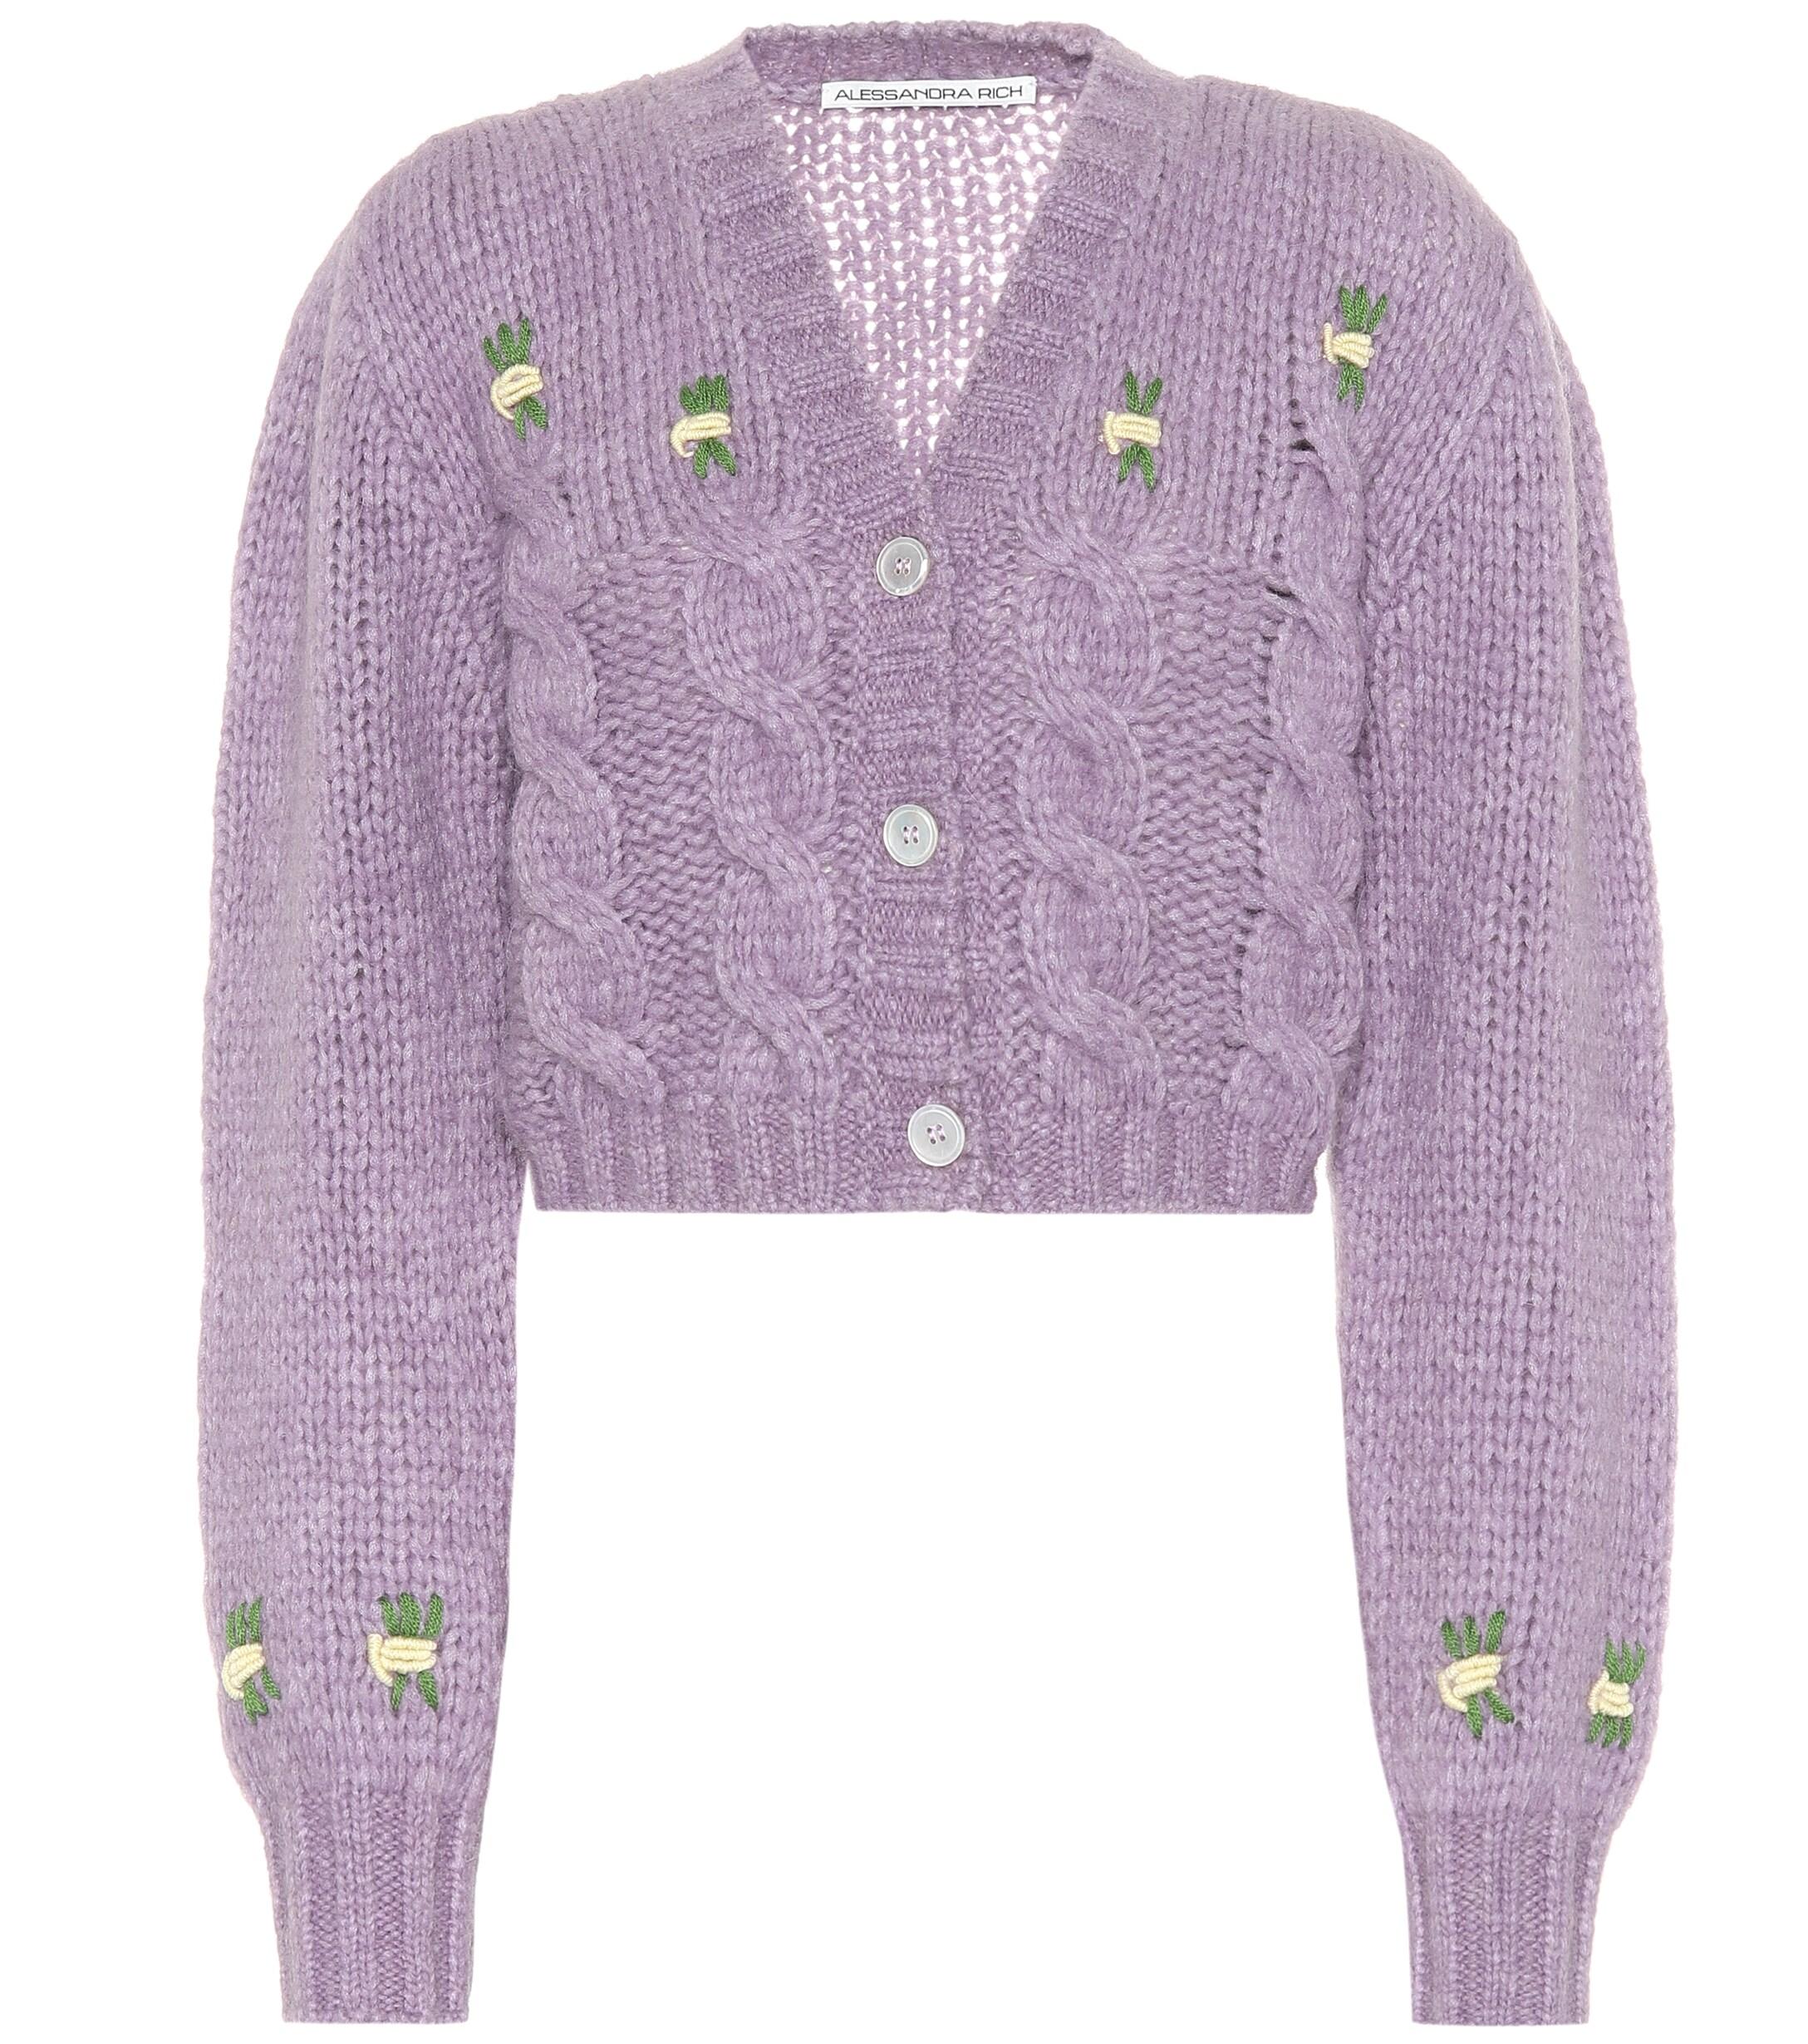 Alessandra Rich Chunky Knit Cropped Cardigan in Lilac (Purple) - Lyst